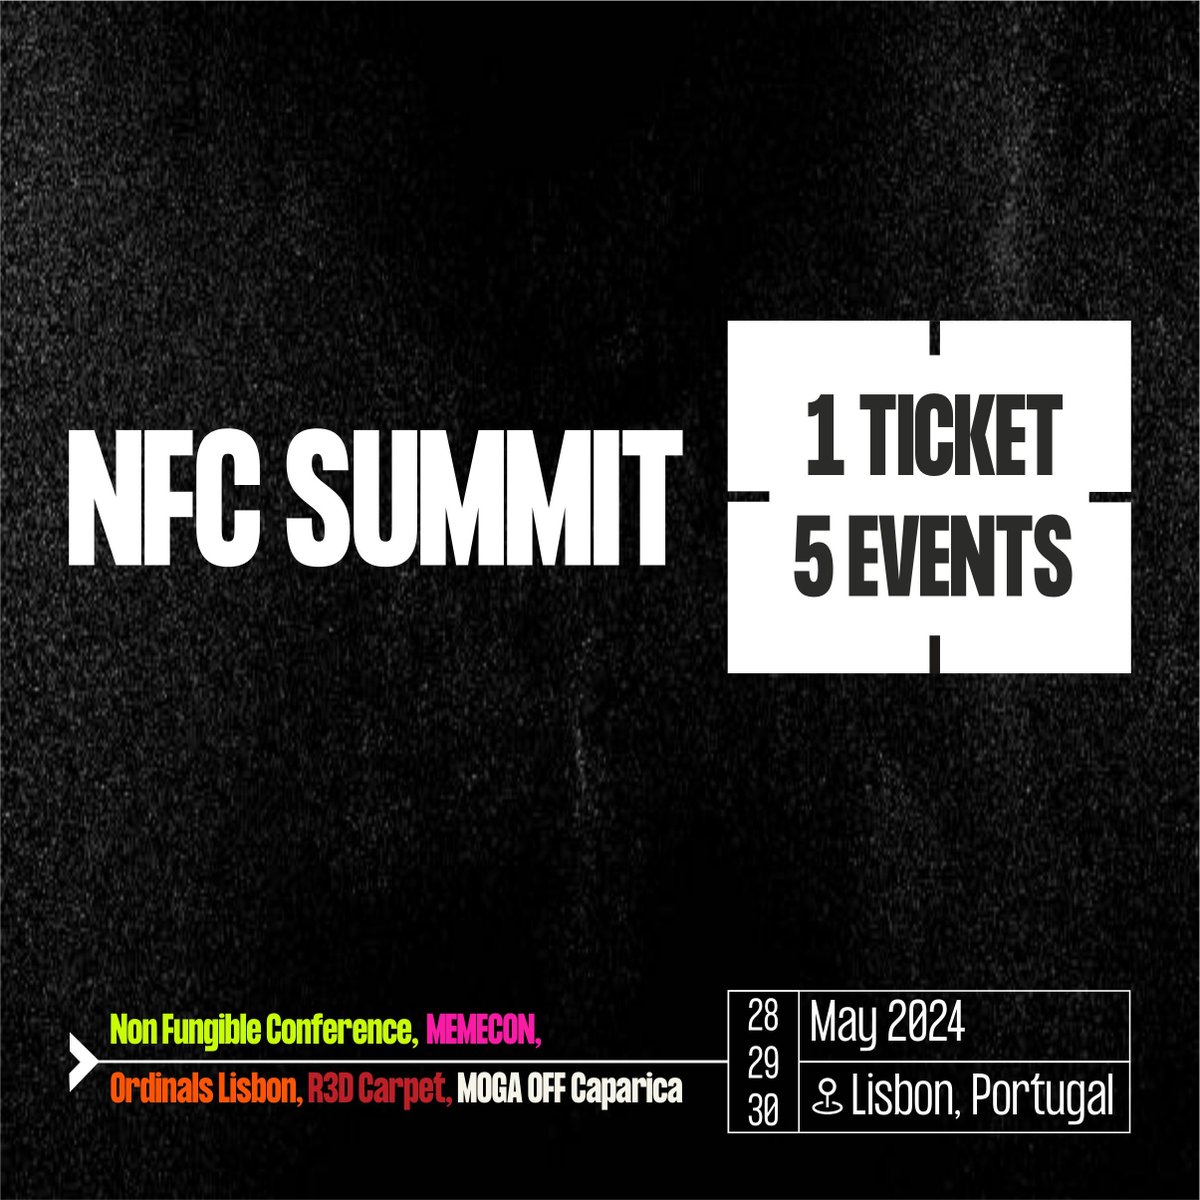 NFC 2024 = 1 TICKET & 5 EVENTS 🔥 1- @NFCsummit 2- @MEMECON_lol by @MetaFroggy_ 3- Ordinals Lisbon by @TO 4- R3D Carpet by @leocrane & @ClareMaguire 5- Grand Beach Party by @TheSandboxGame & @MogaFestival Who can't wait??